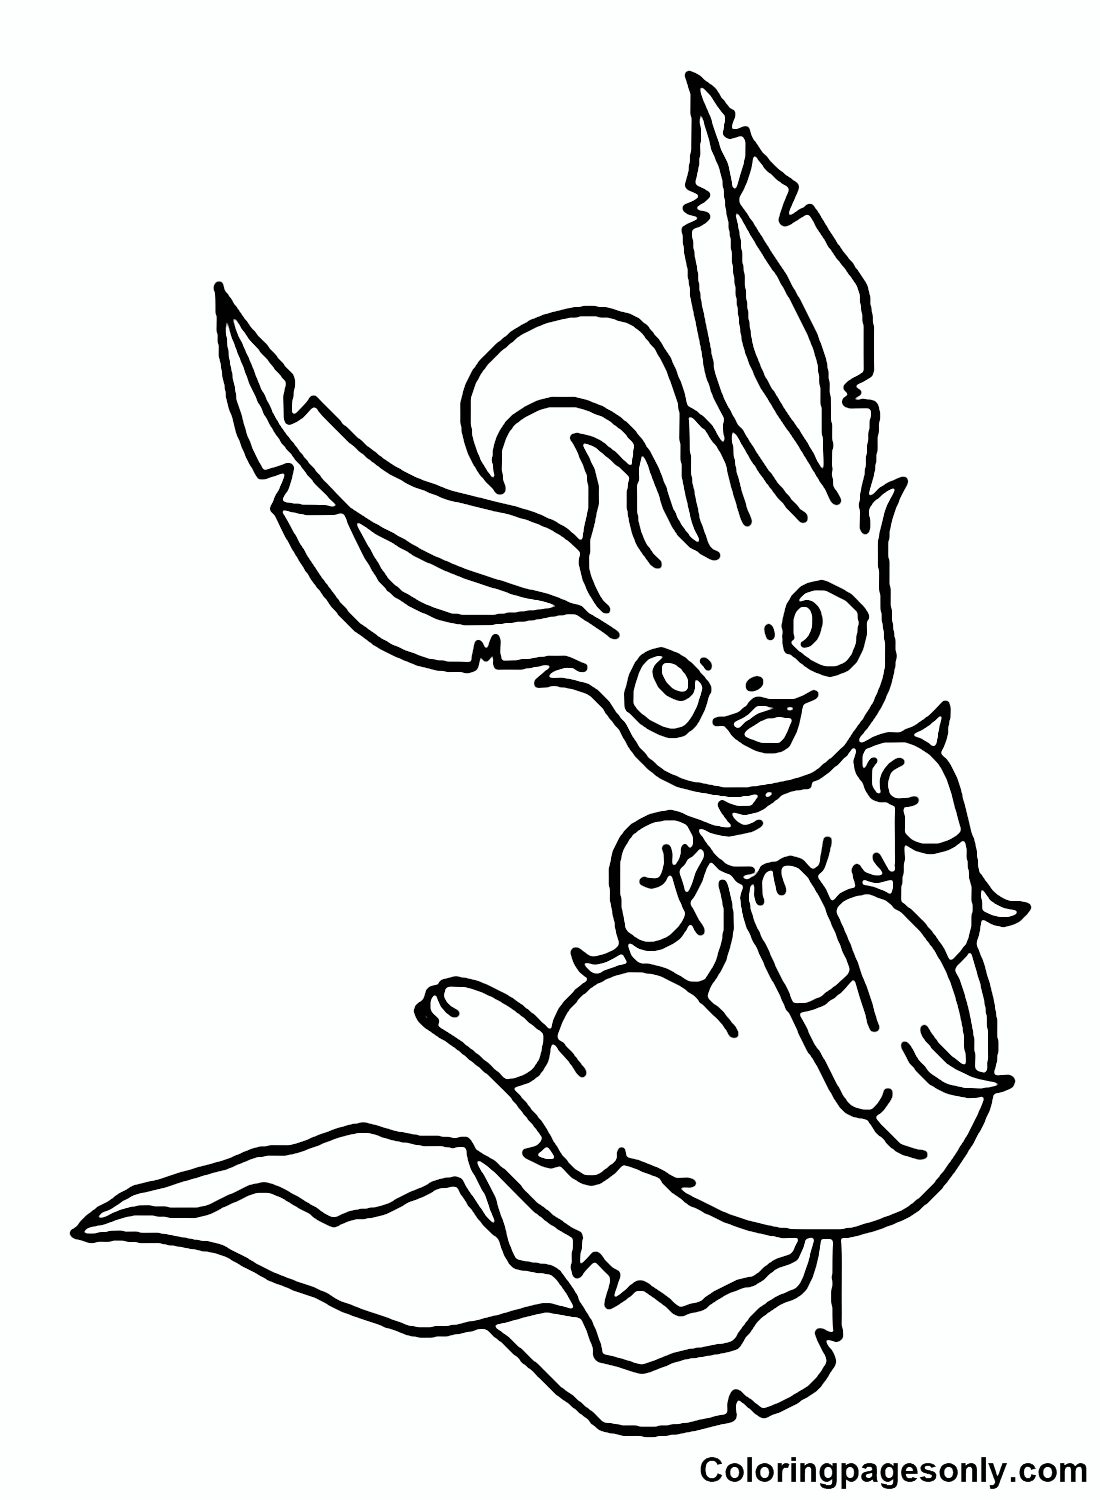 Leafeon coloring pages printable for free download